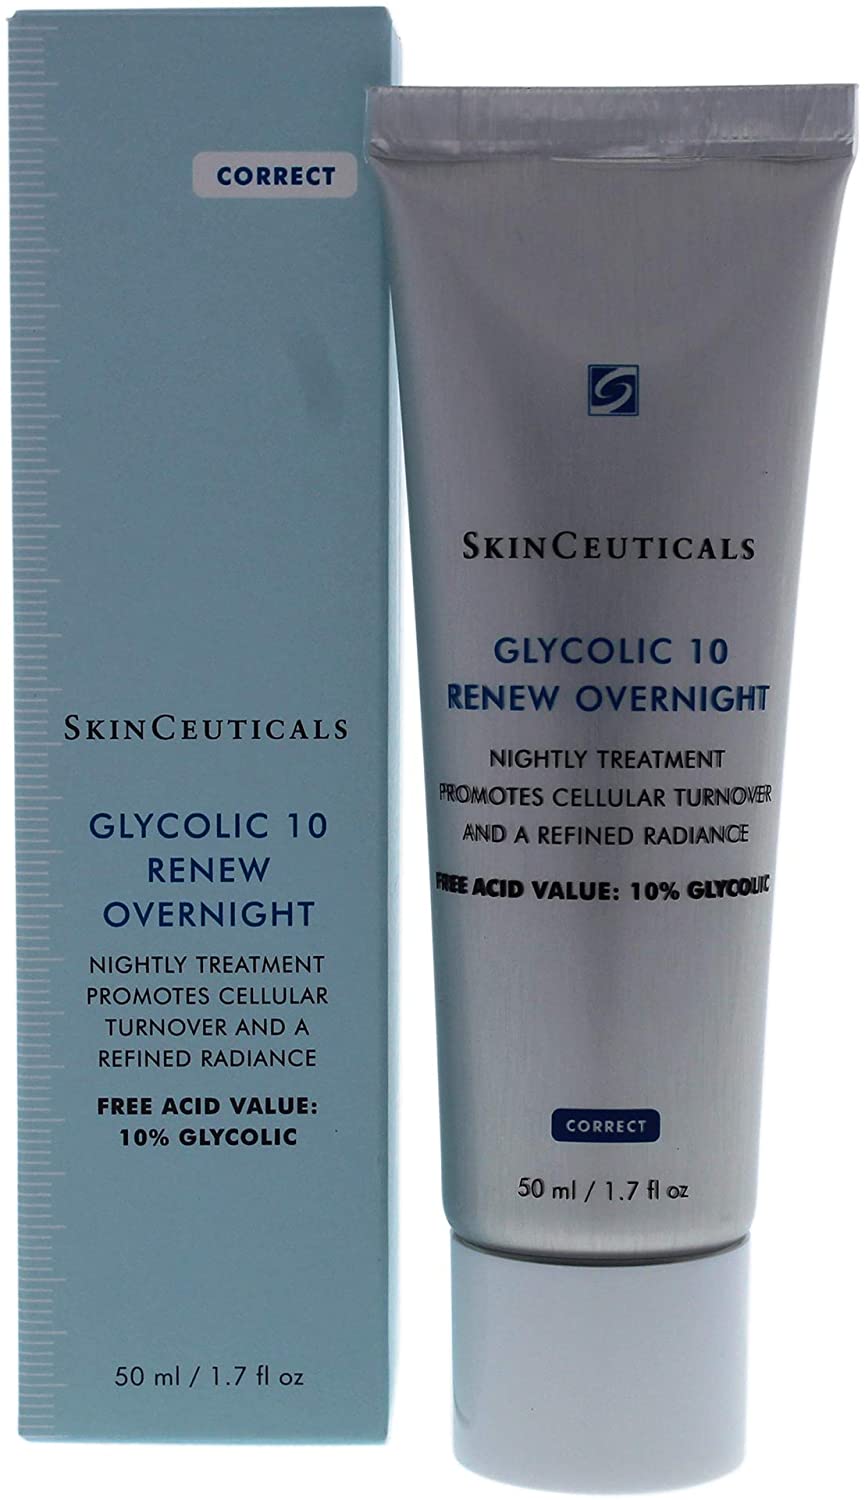 SkinCeuticals Glycolic 10 Renew Over night 50 ml